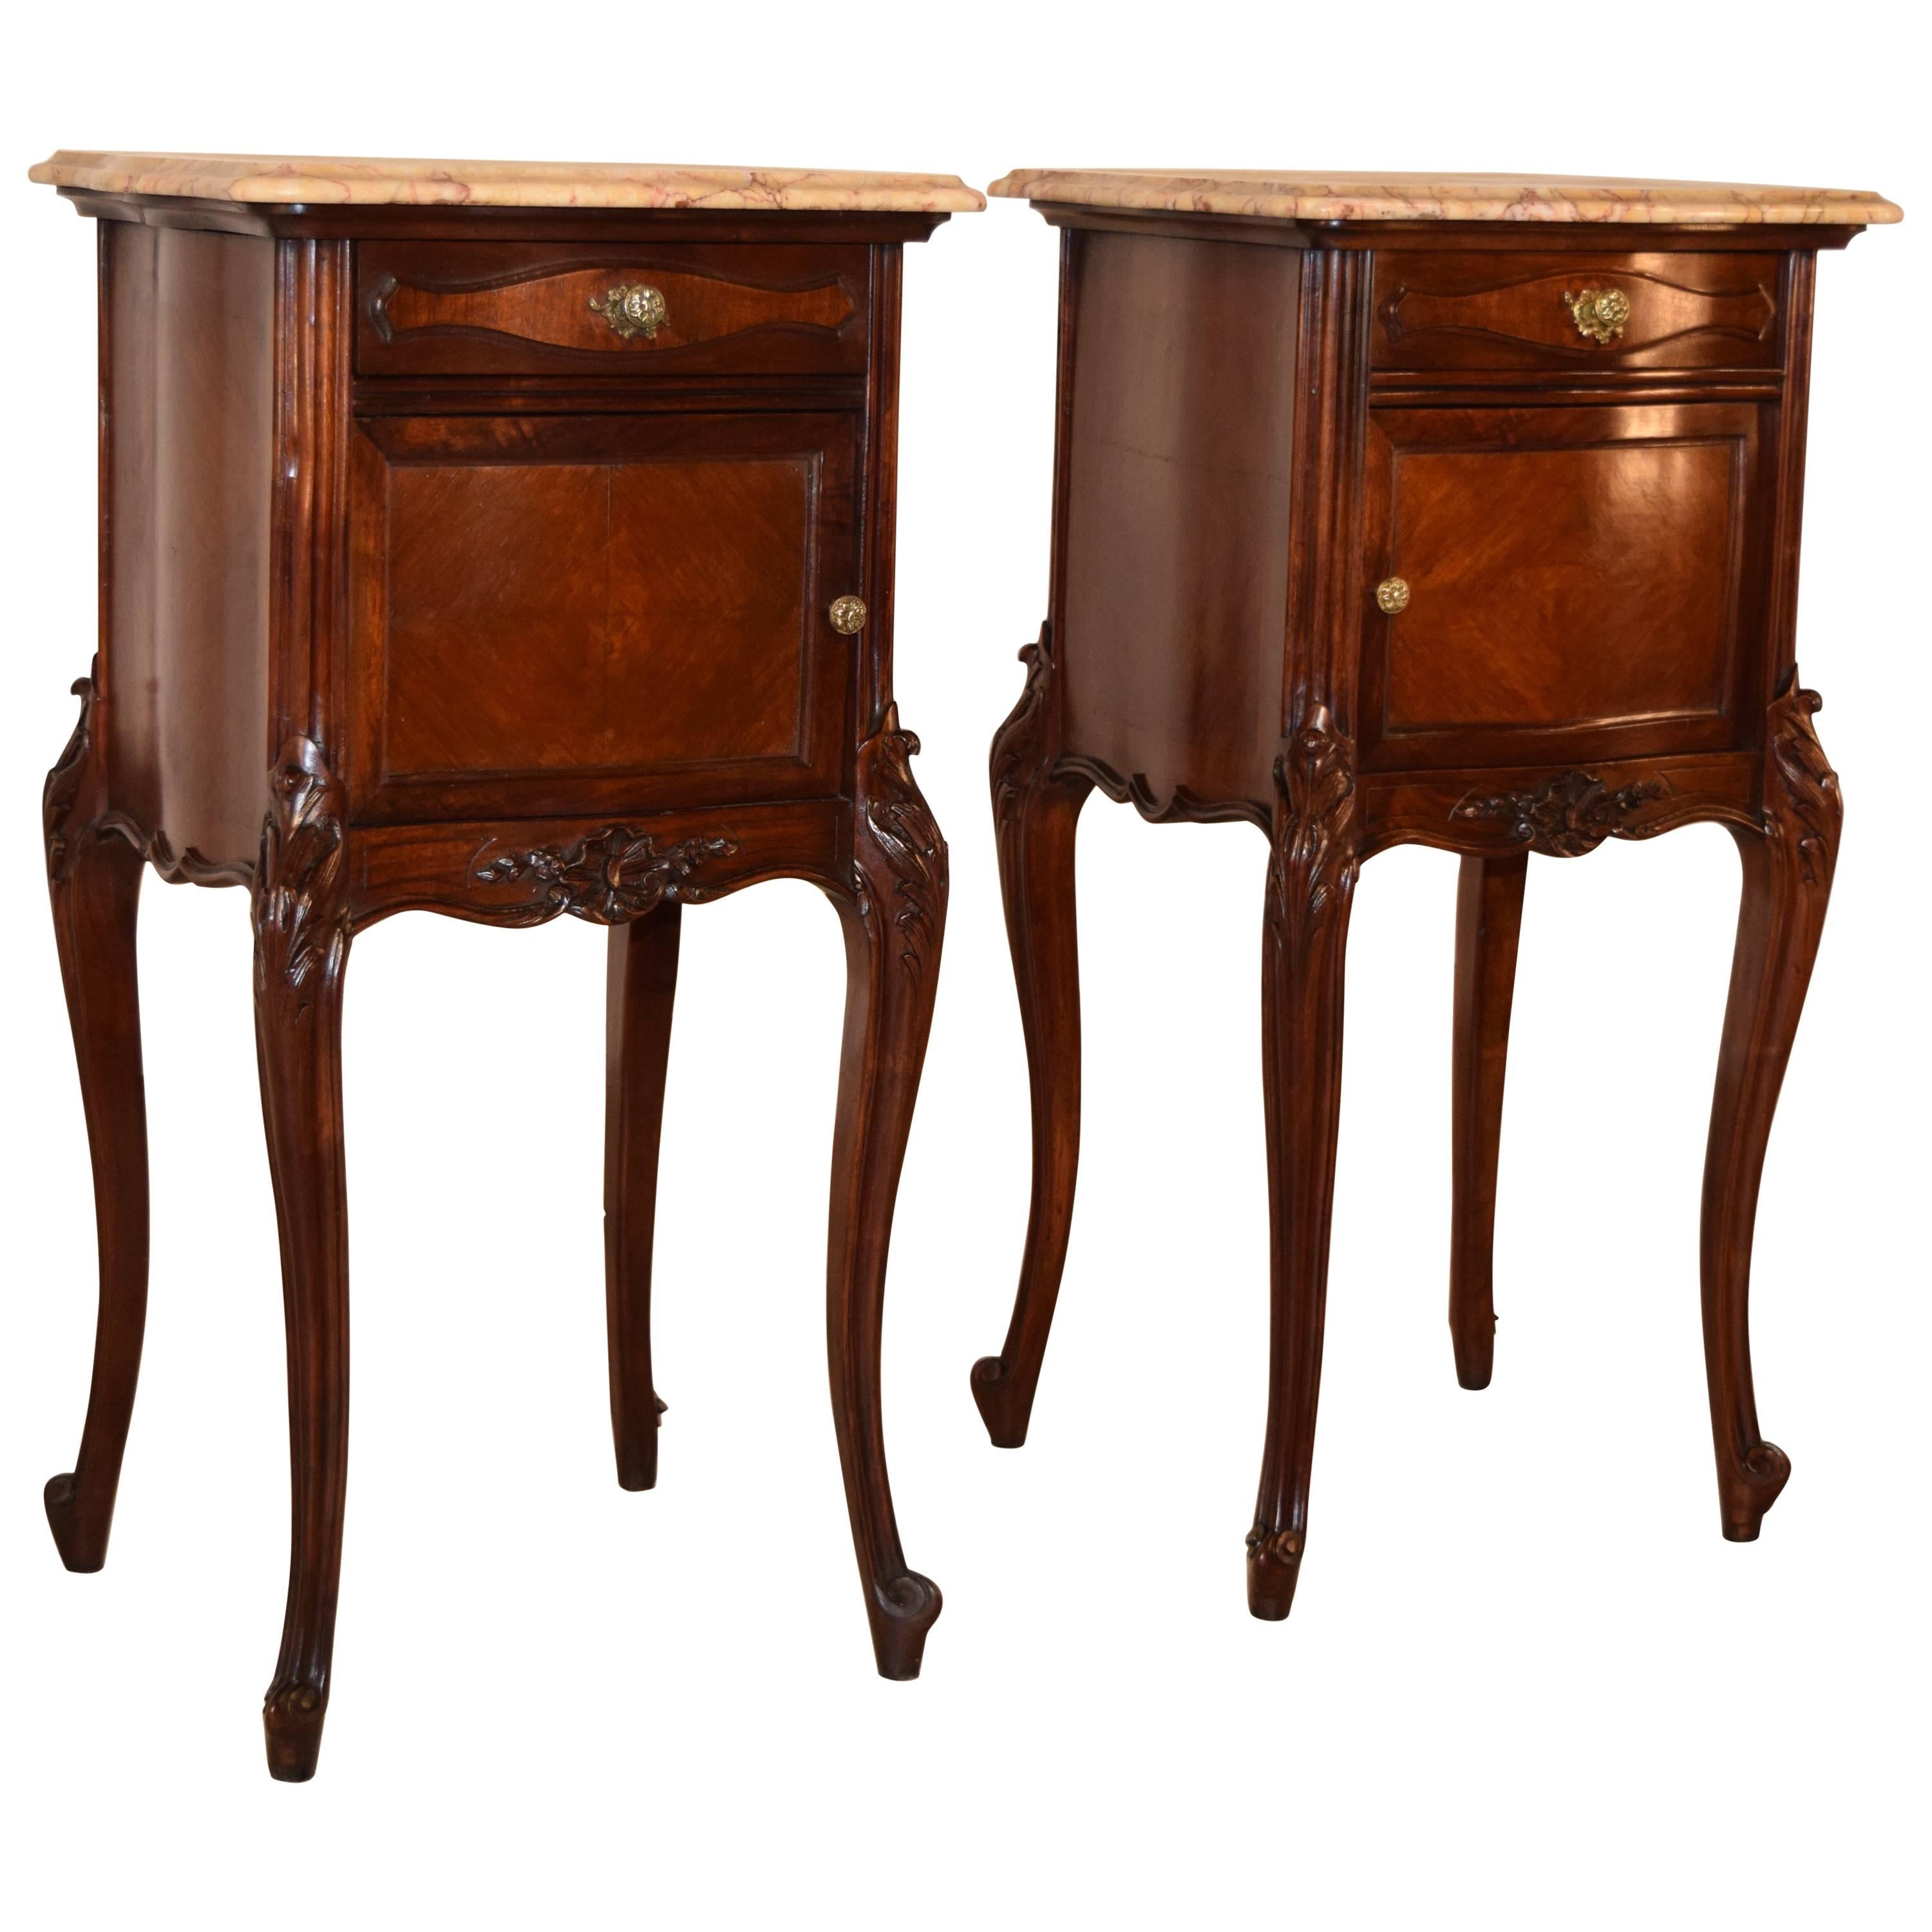 19th Century Pair of French Bedside Tables